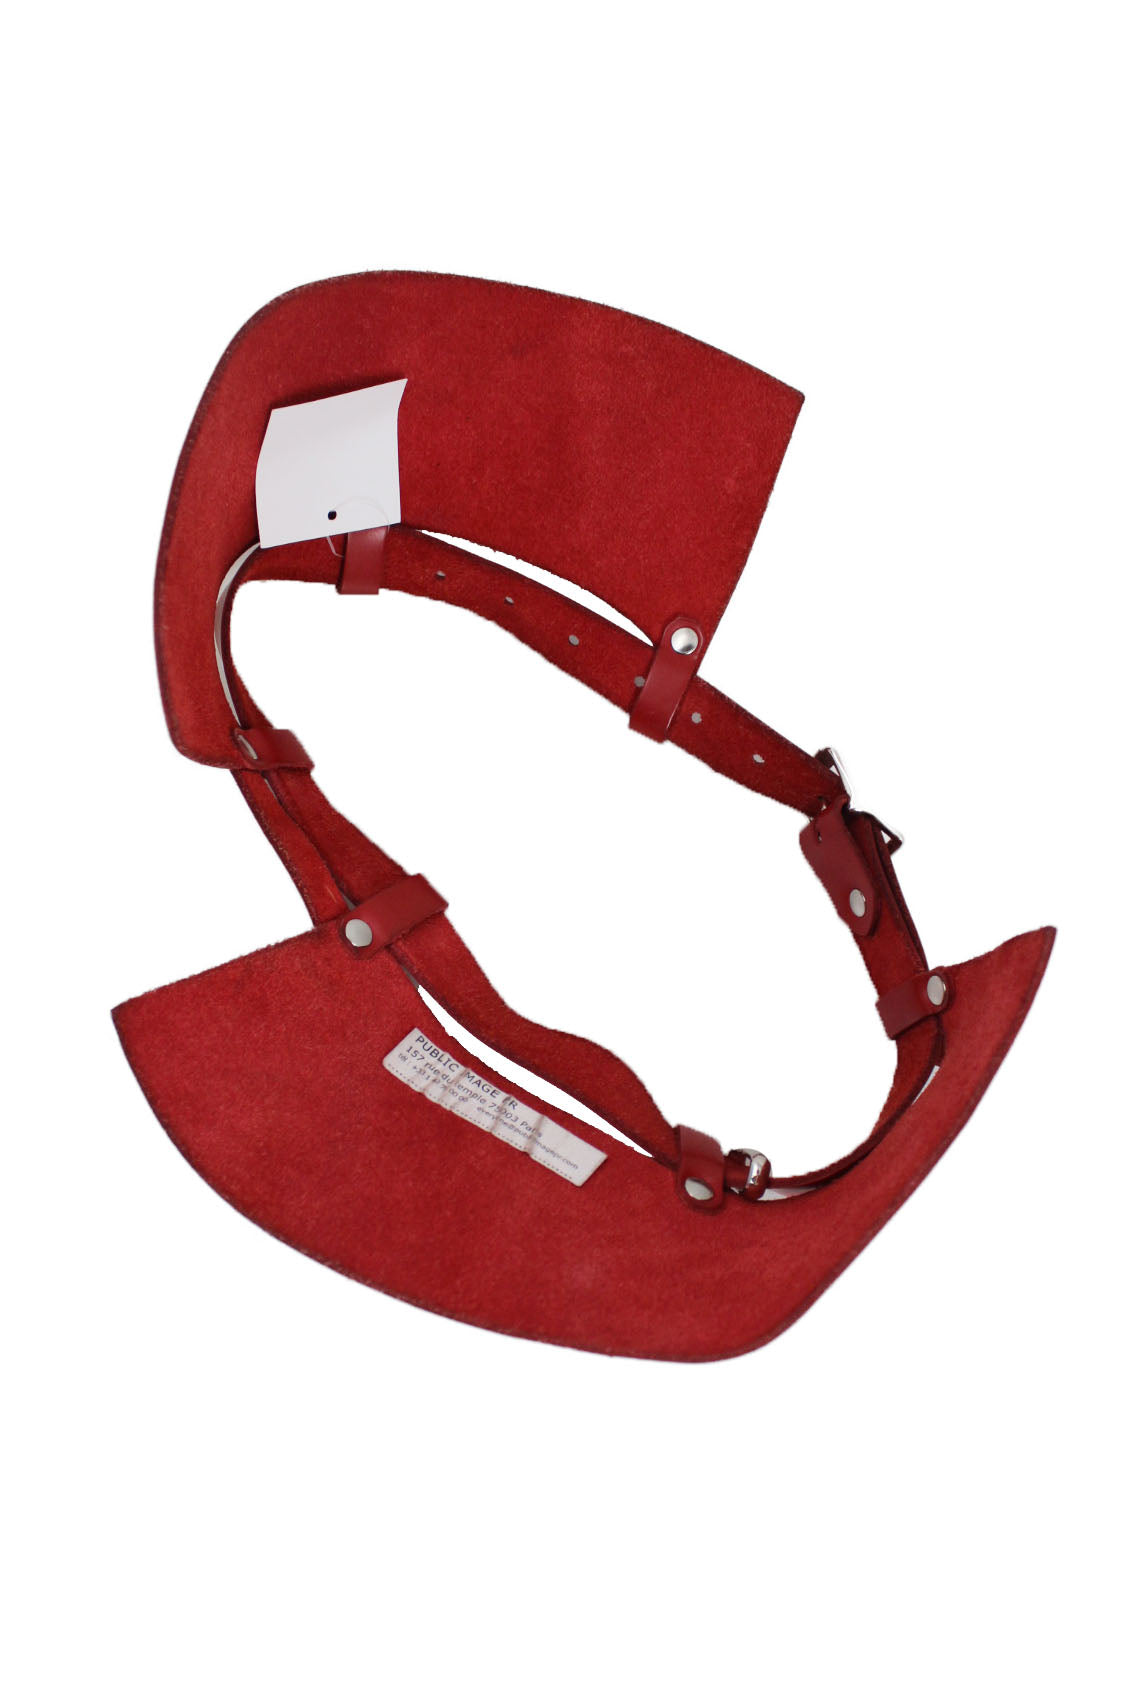 zana bayne public image pr red leather belt. features 2 side panels that flare out on the side and are attached with loops and metal studs. silver buckle as closure